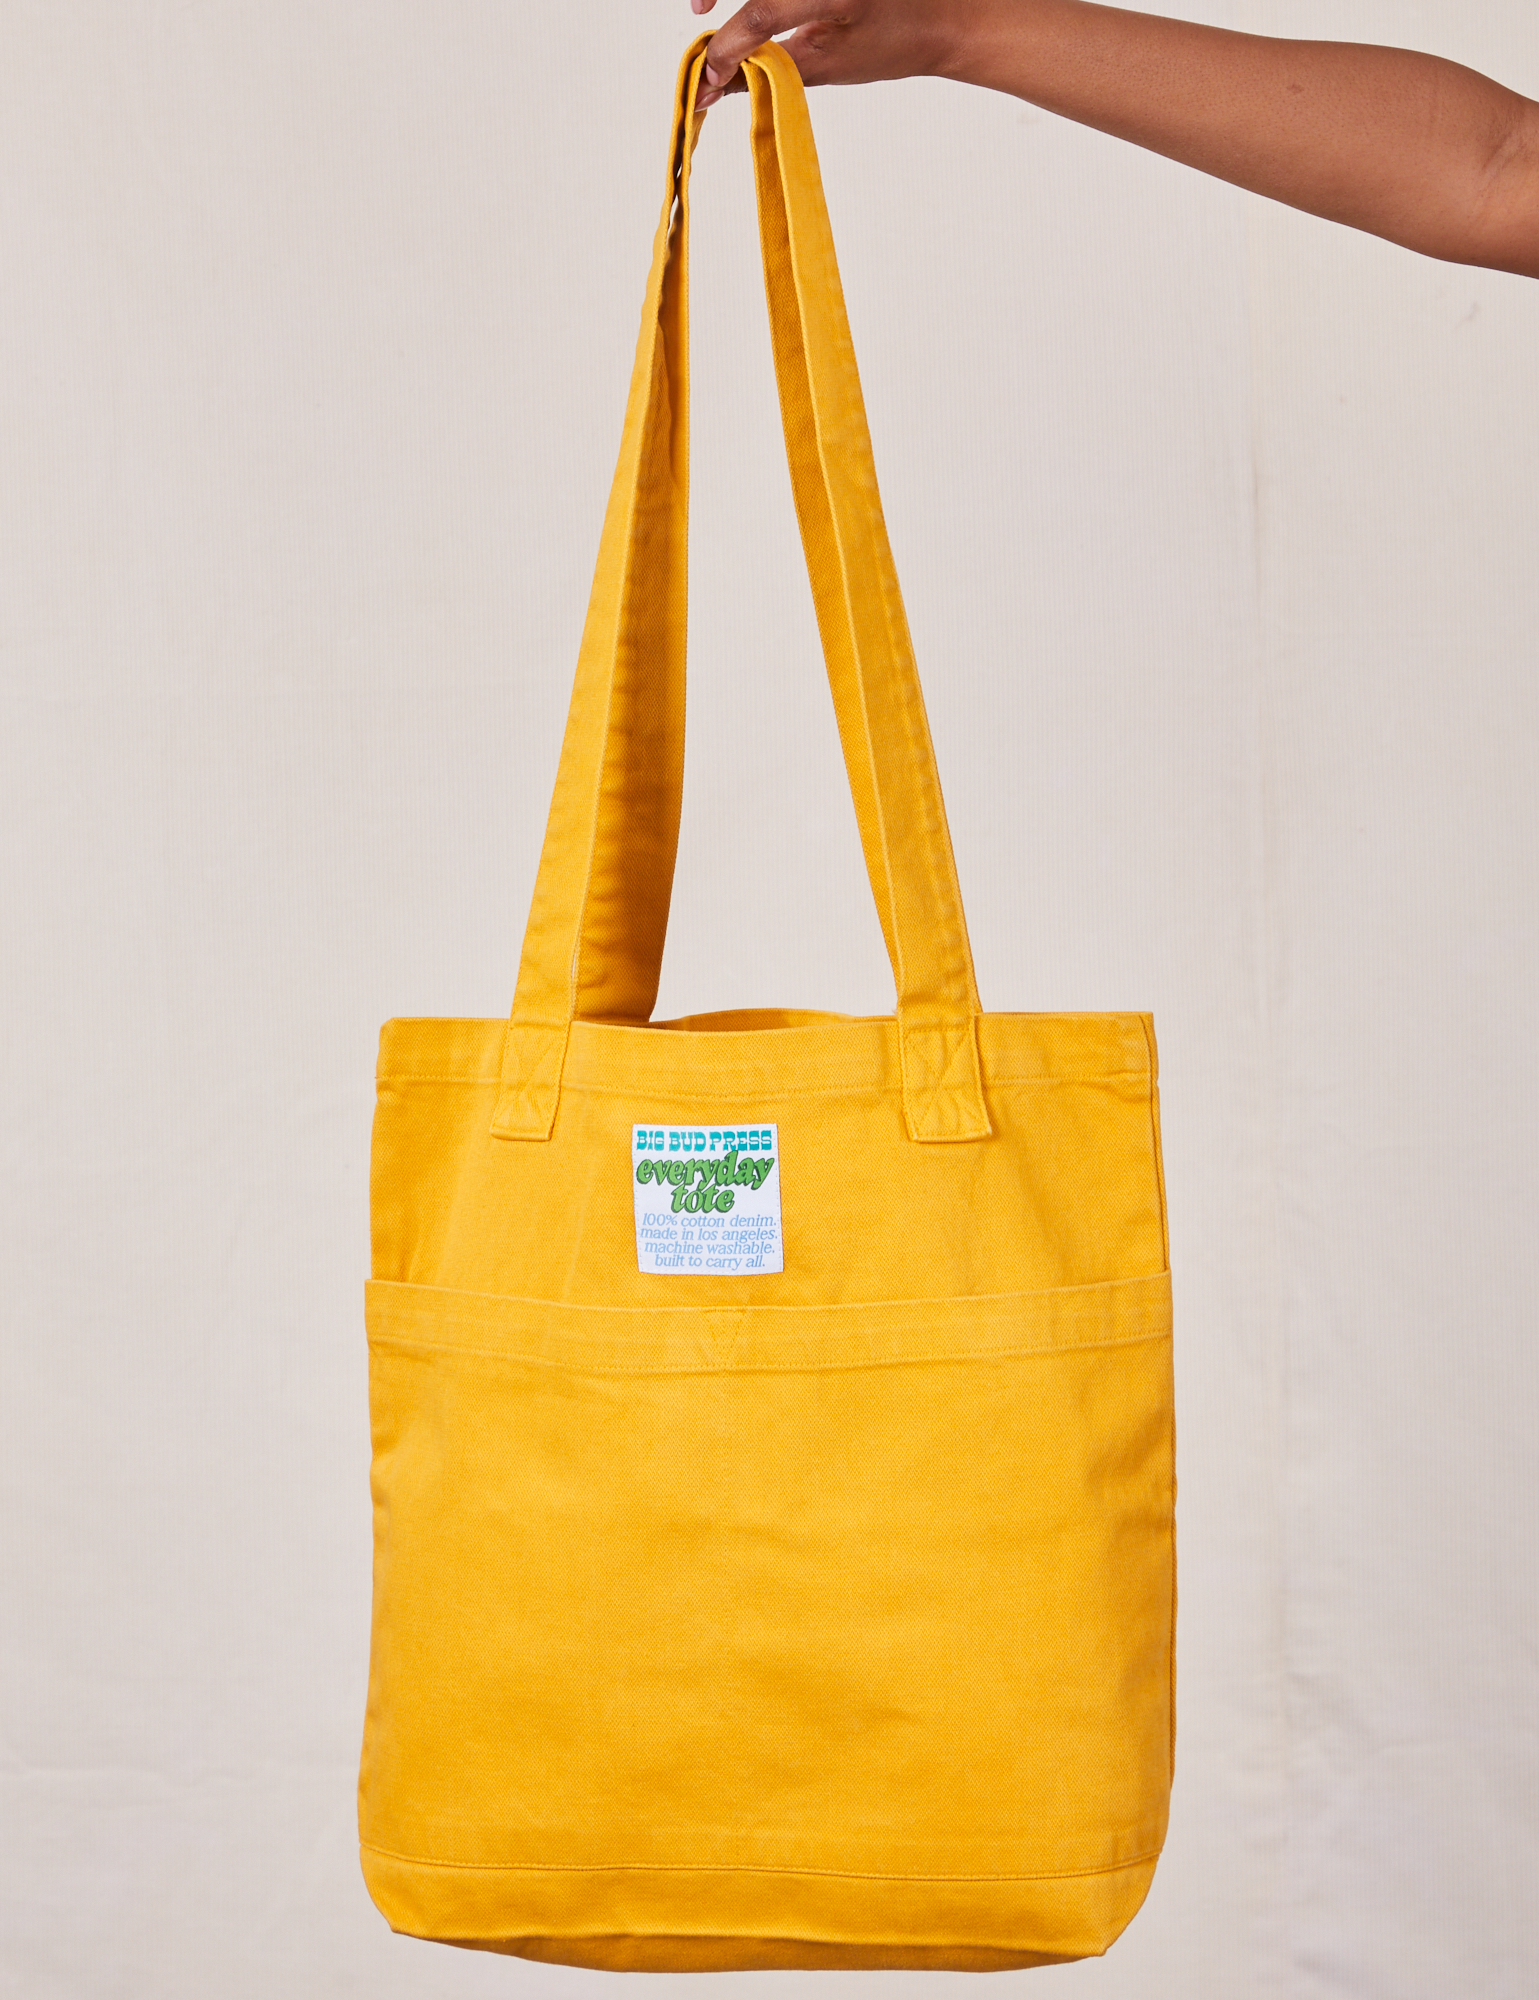 Everyday Tote Bag in Mustard Yellow